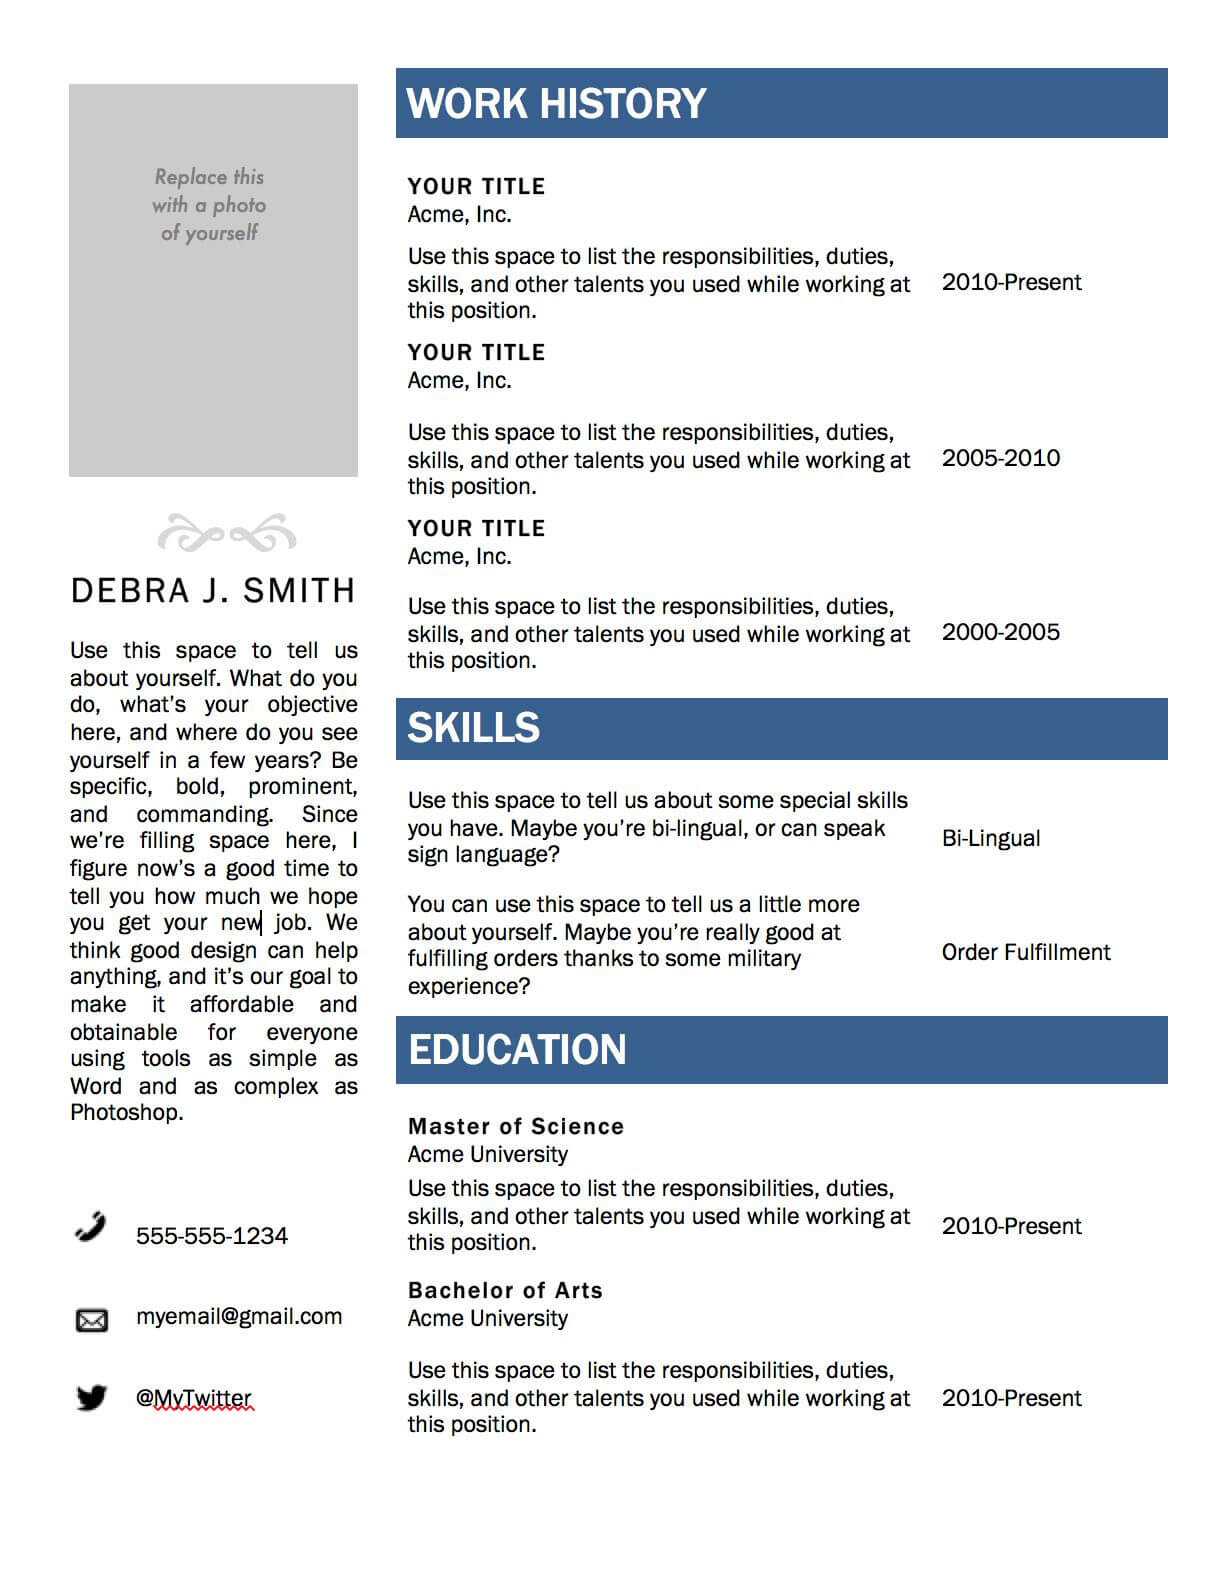 ms word resume templates free download